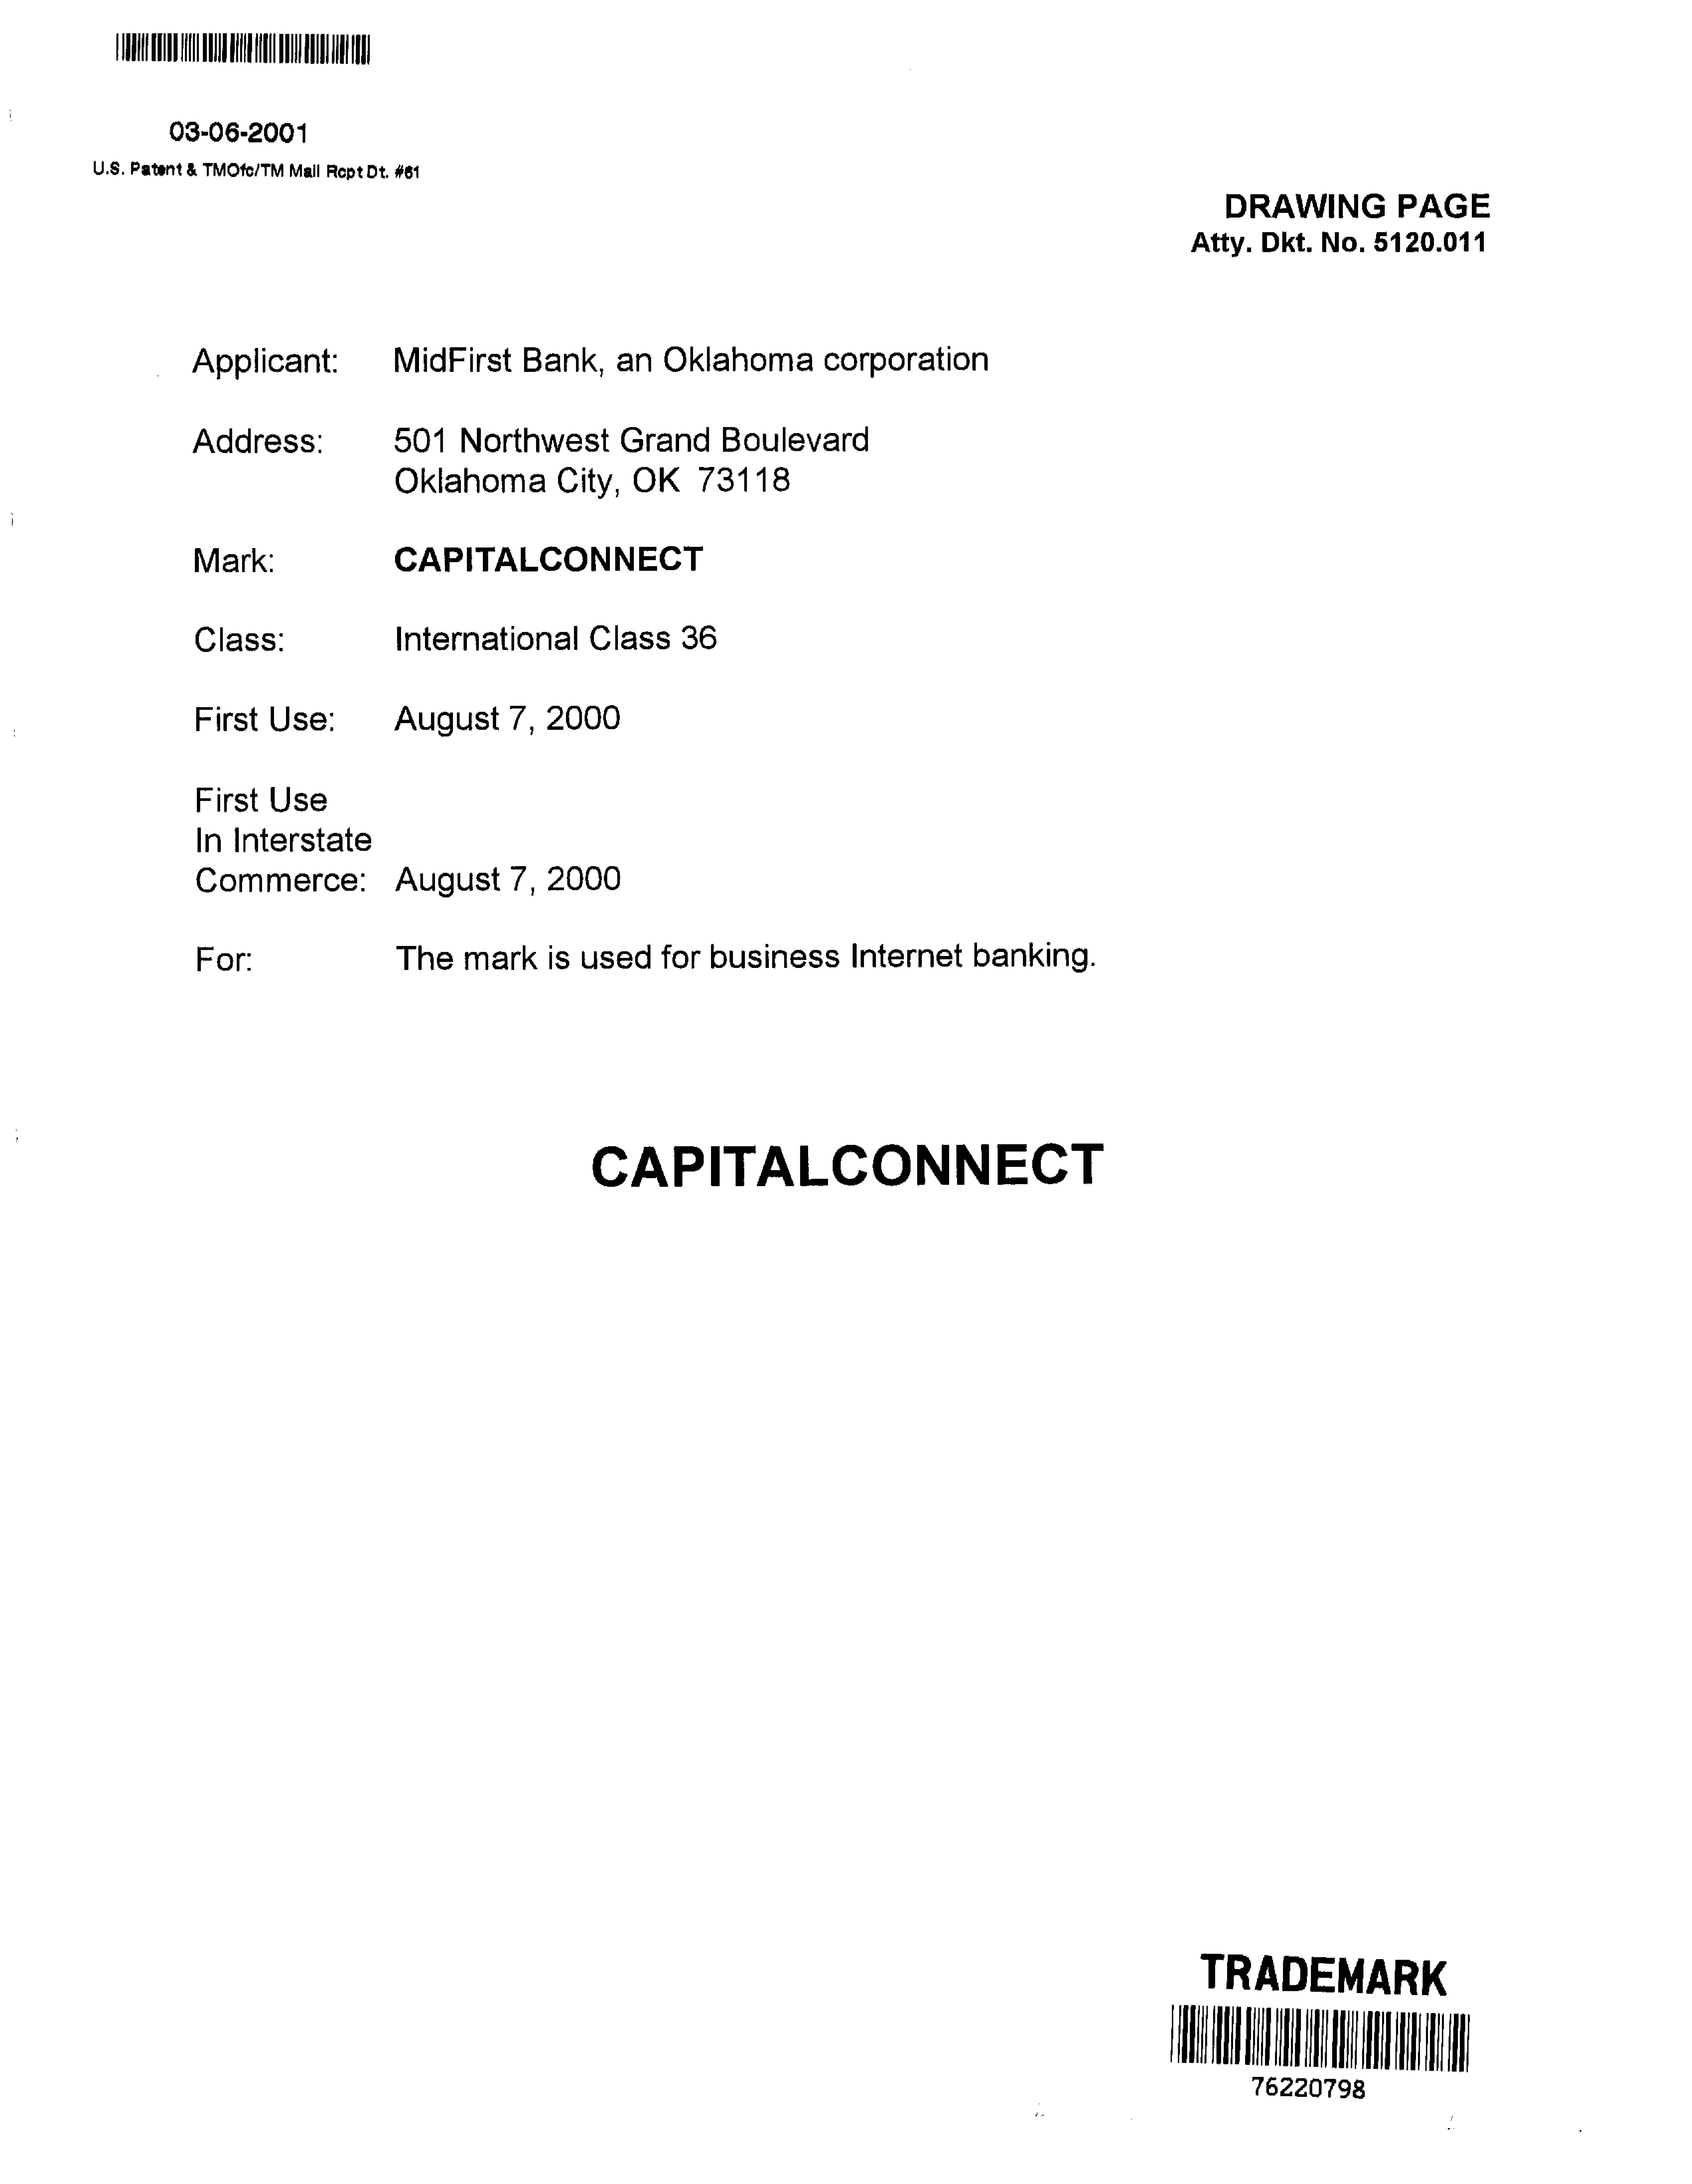  CAPITAL CONNECT